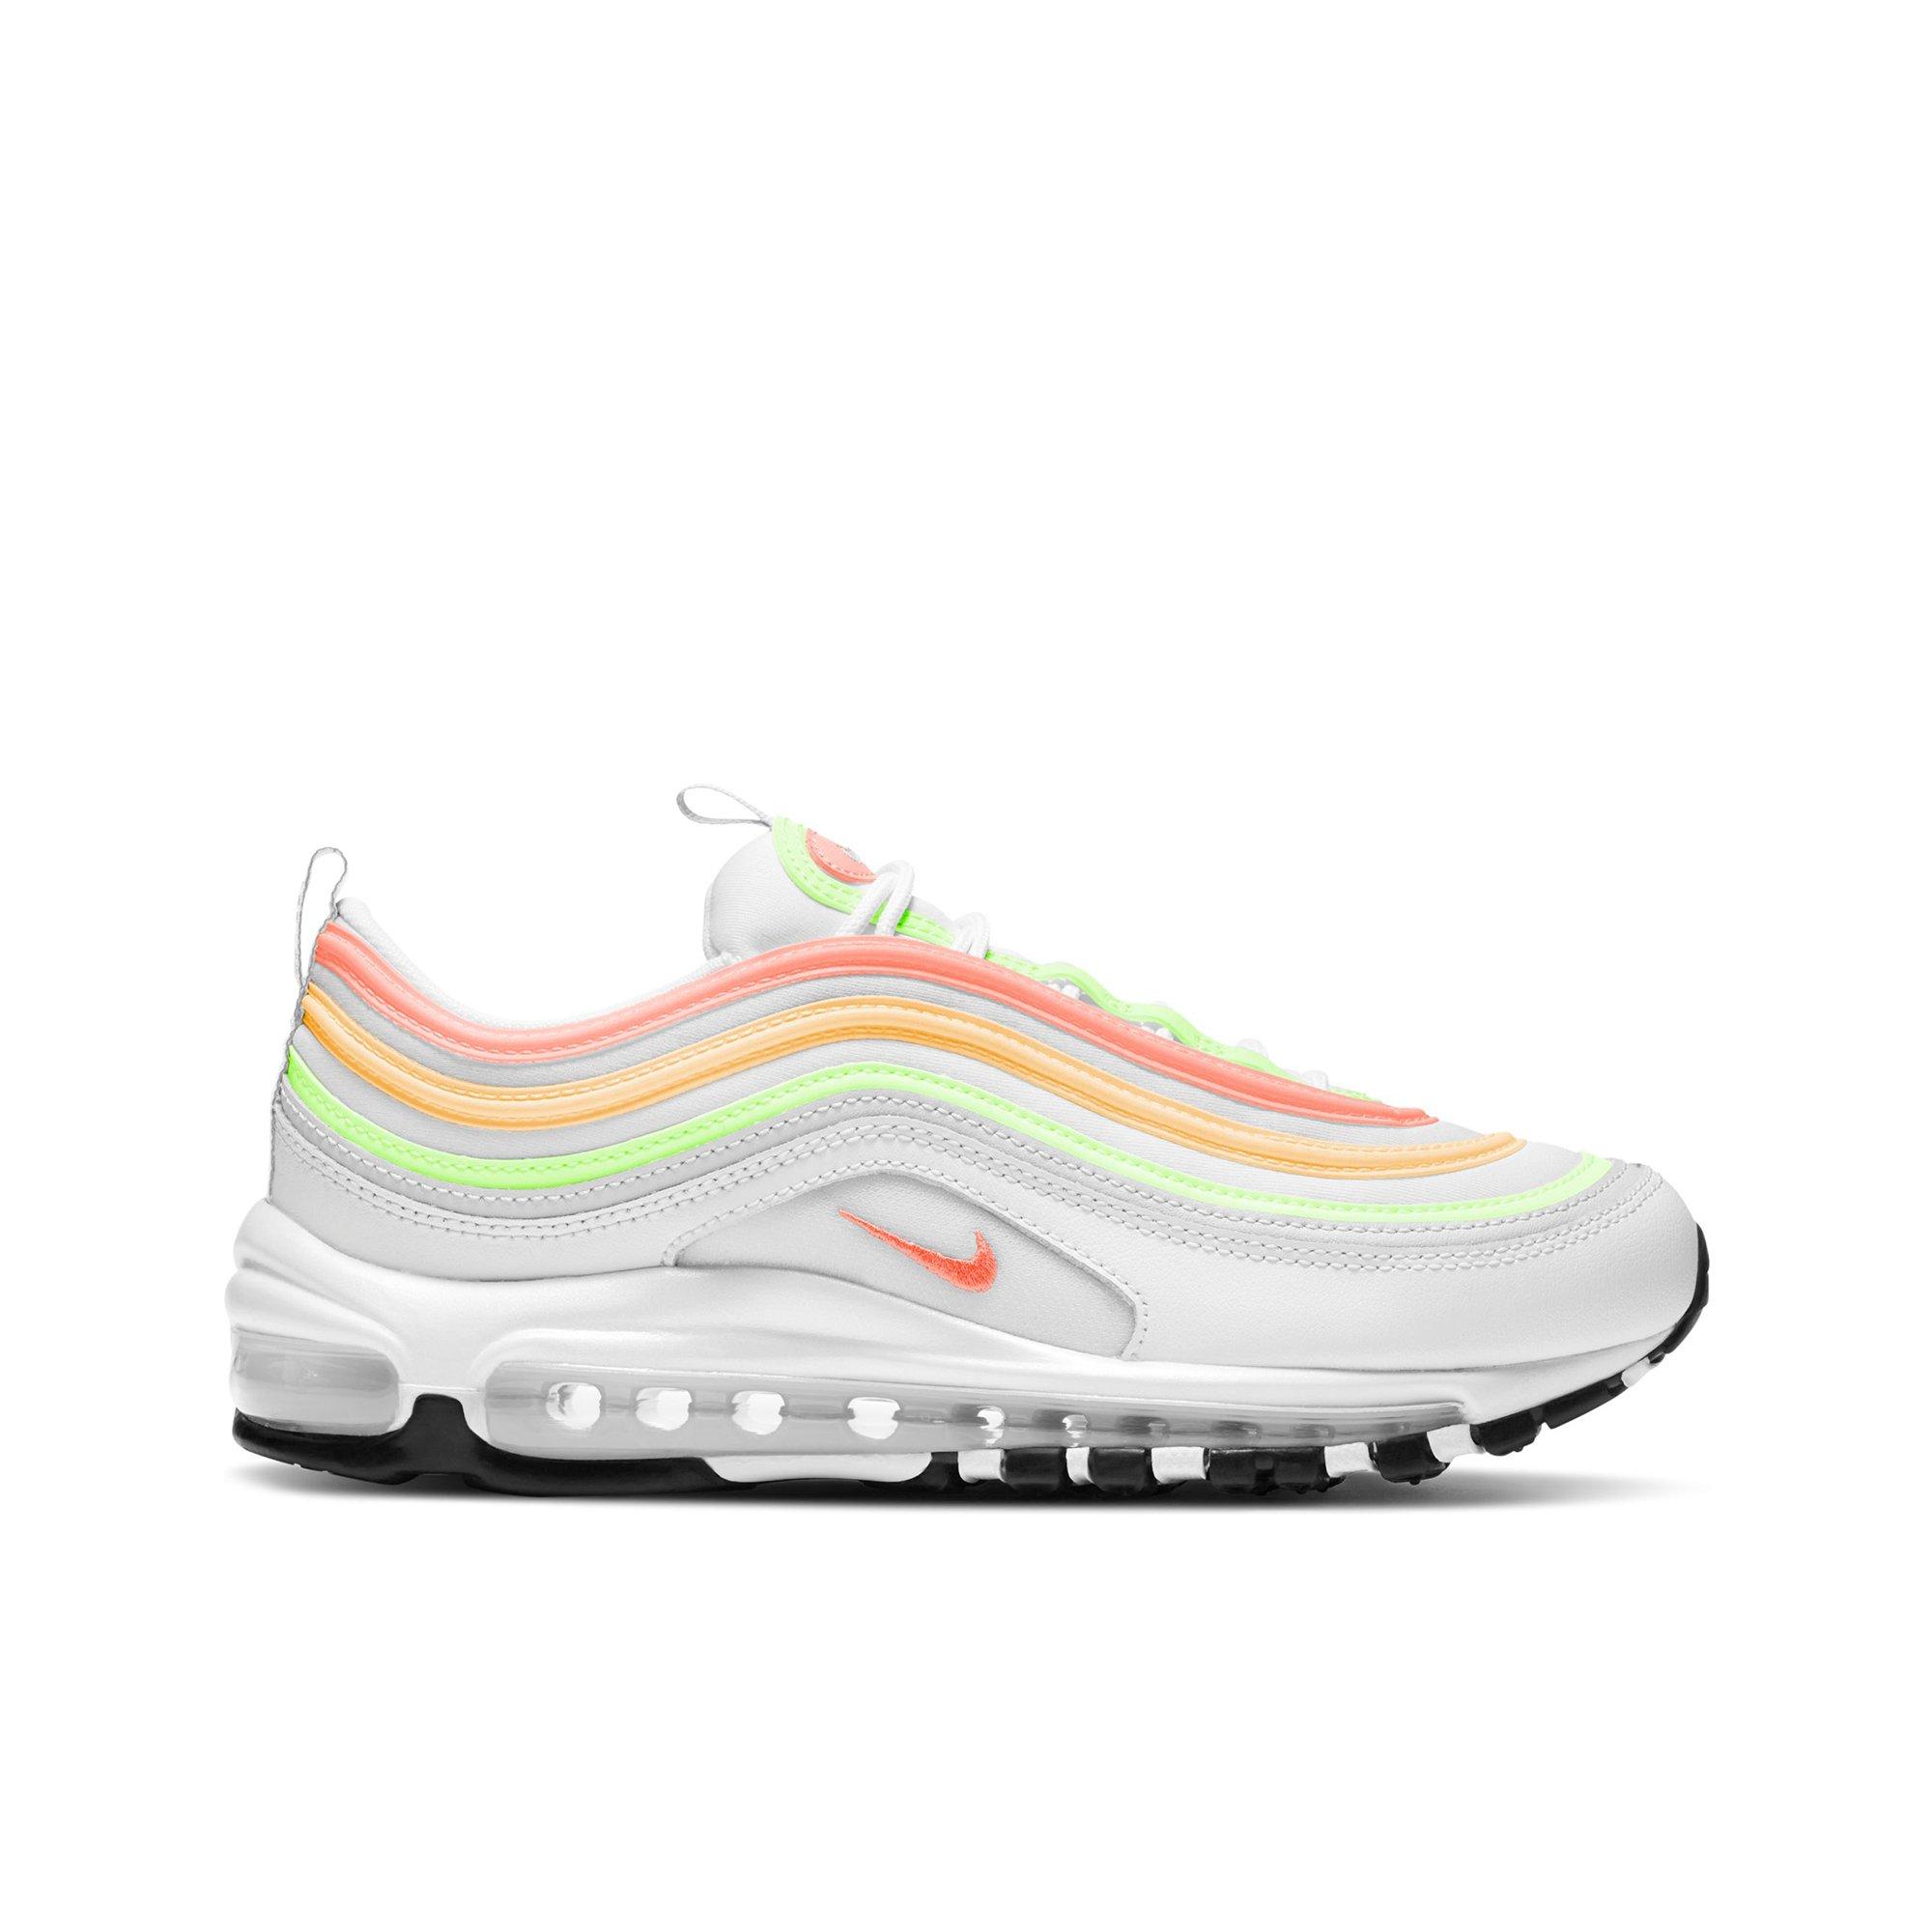 white and pink air max 97